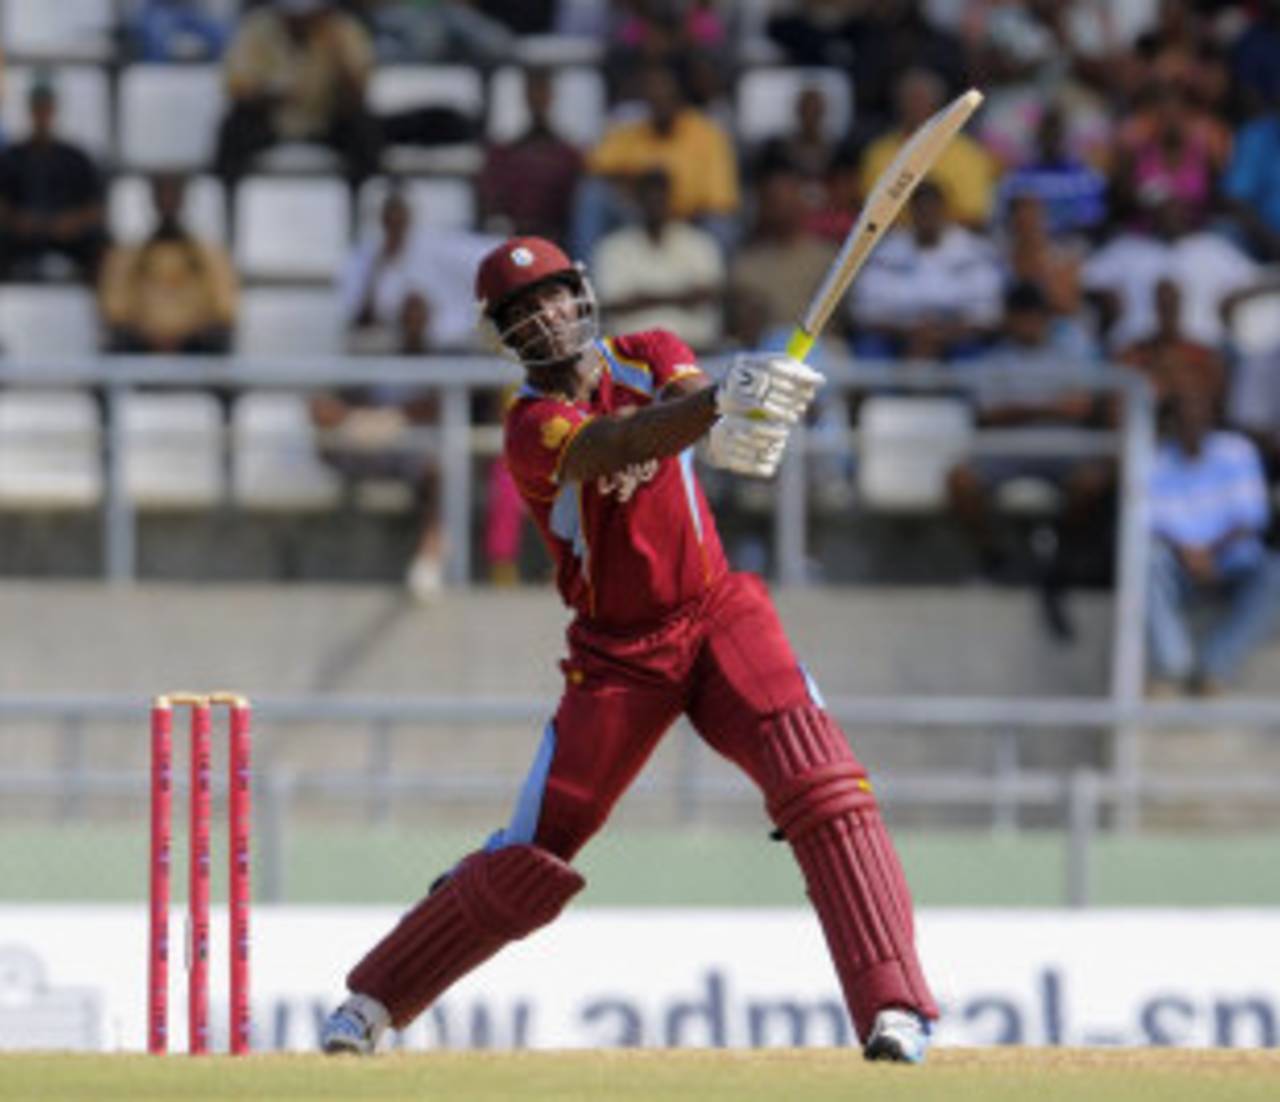 Darren Sammy takes the aerial route, West Indies v New Zealand, 2nd T20I, Dominica, July 6, 2014